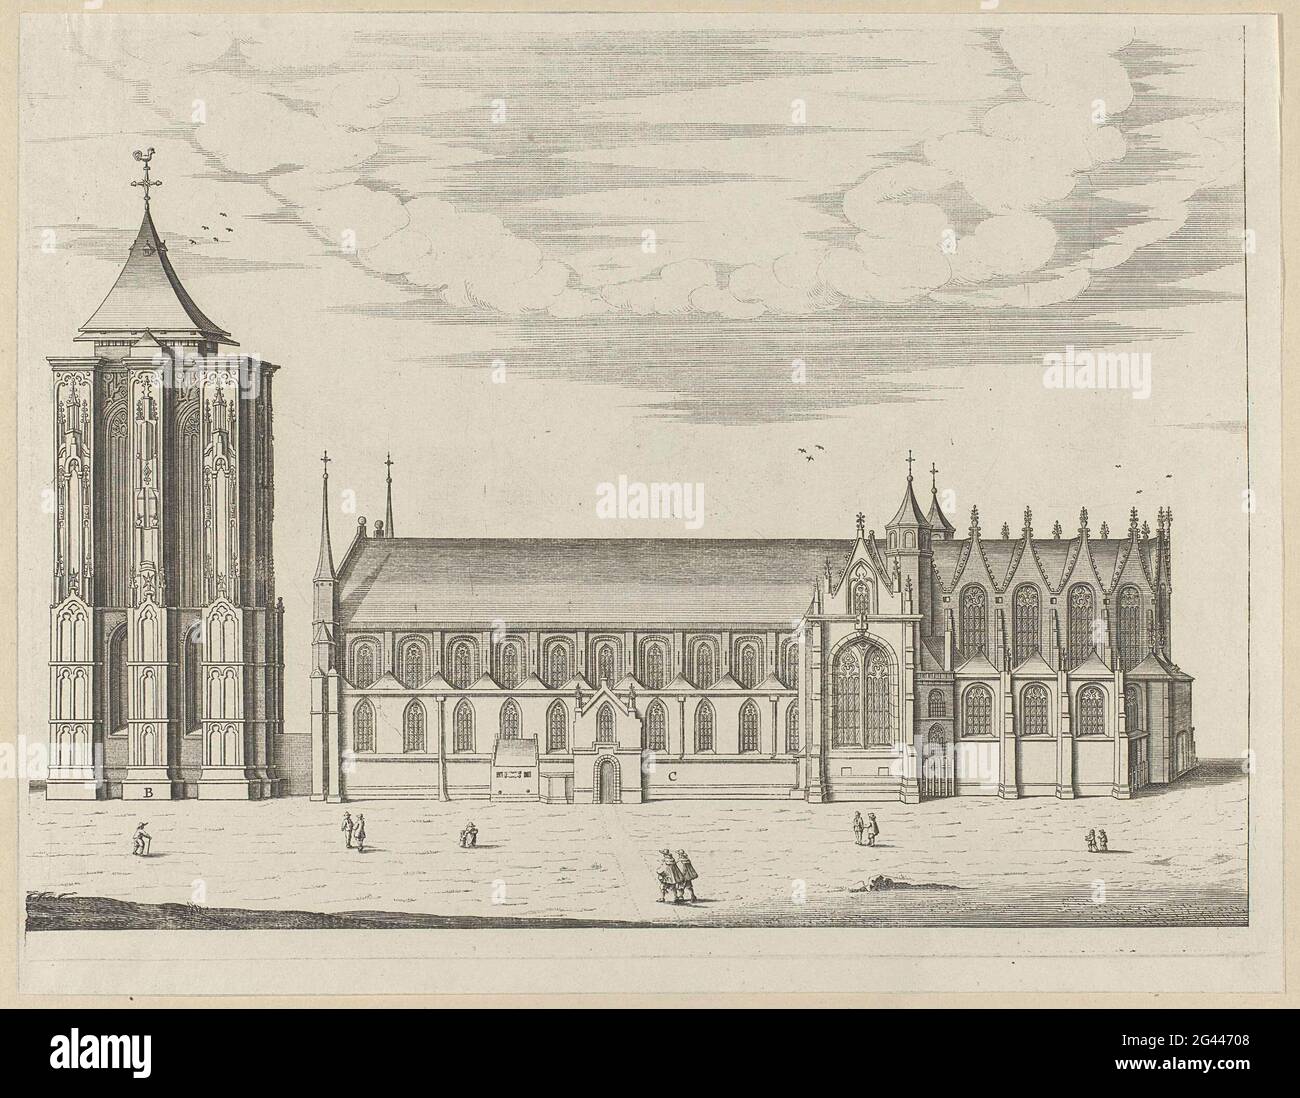 Sint-Lievensmonsterkerk and Tower in Zierikzee, in welfare, before the fire of 1832. Sint-Lievensmonsterkerk and tower or Grote Kerk in Zierikzee, in welfare, before the fire of 6 October 1832. With a few figures on the road, the tower and The church indicated by the letters B and C. Stock Photo